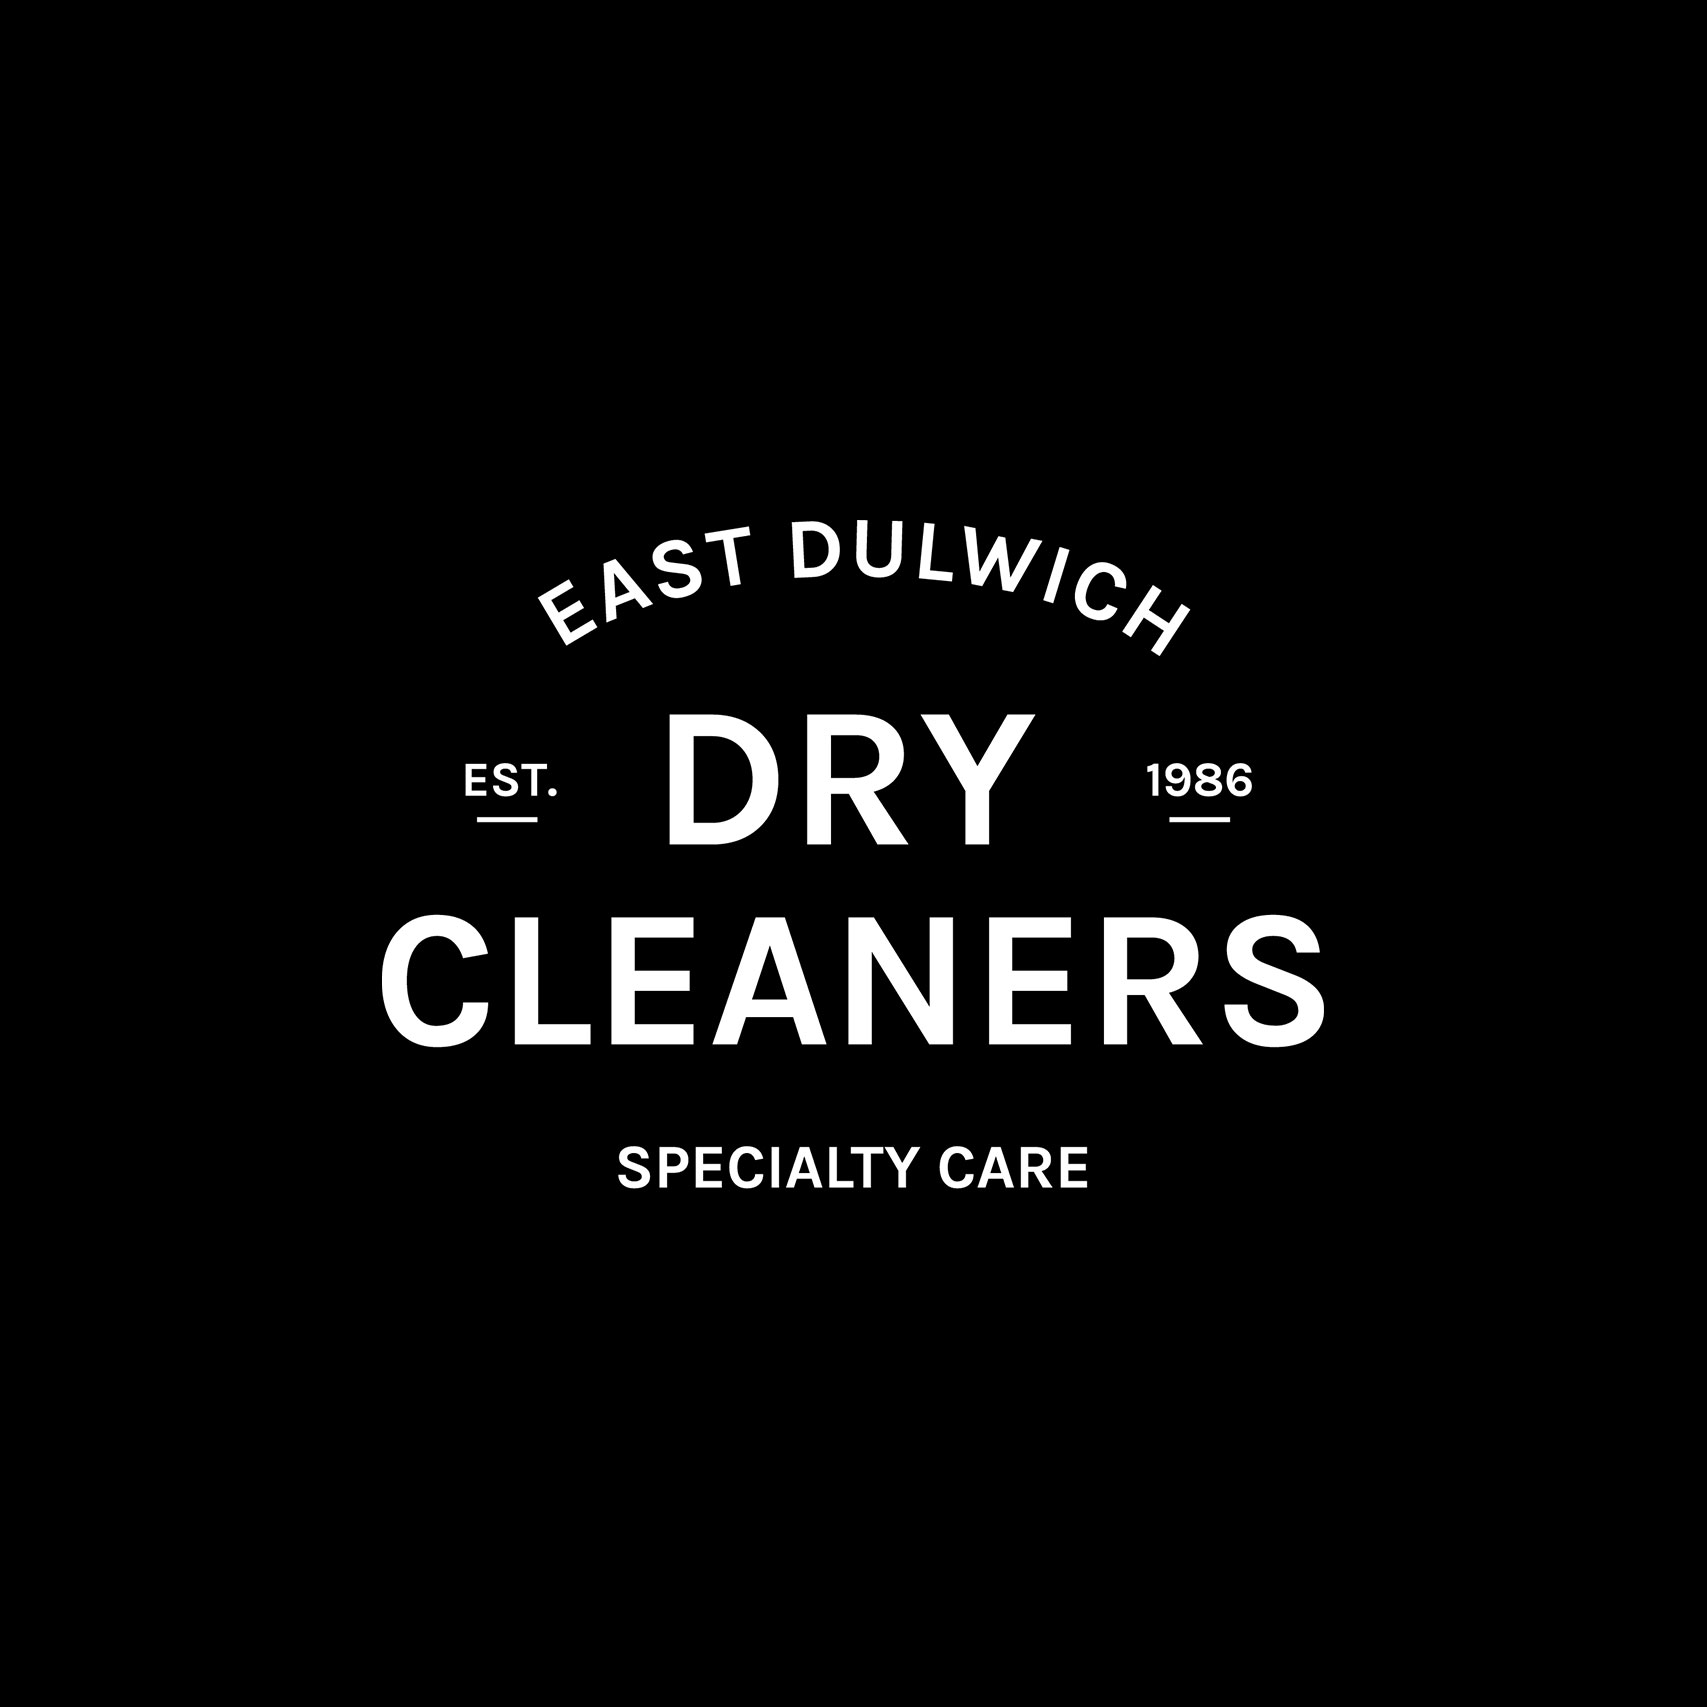 Small business logo design for East Dulwich Dry Cleaners